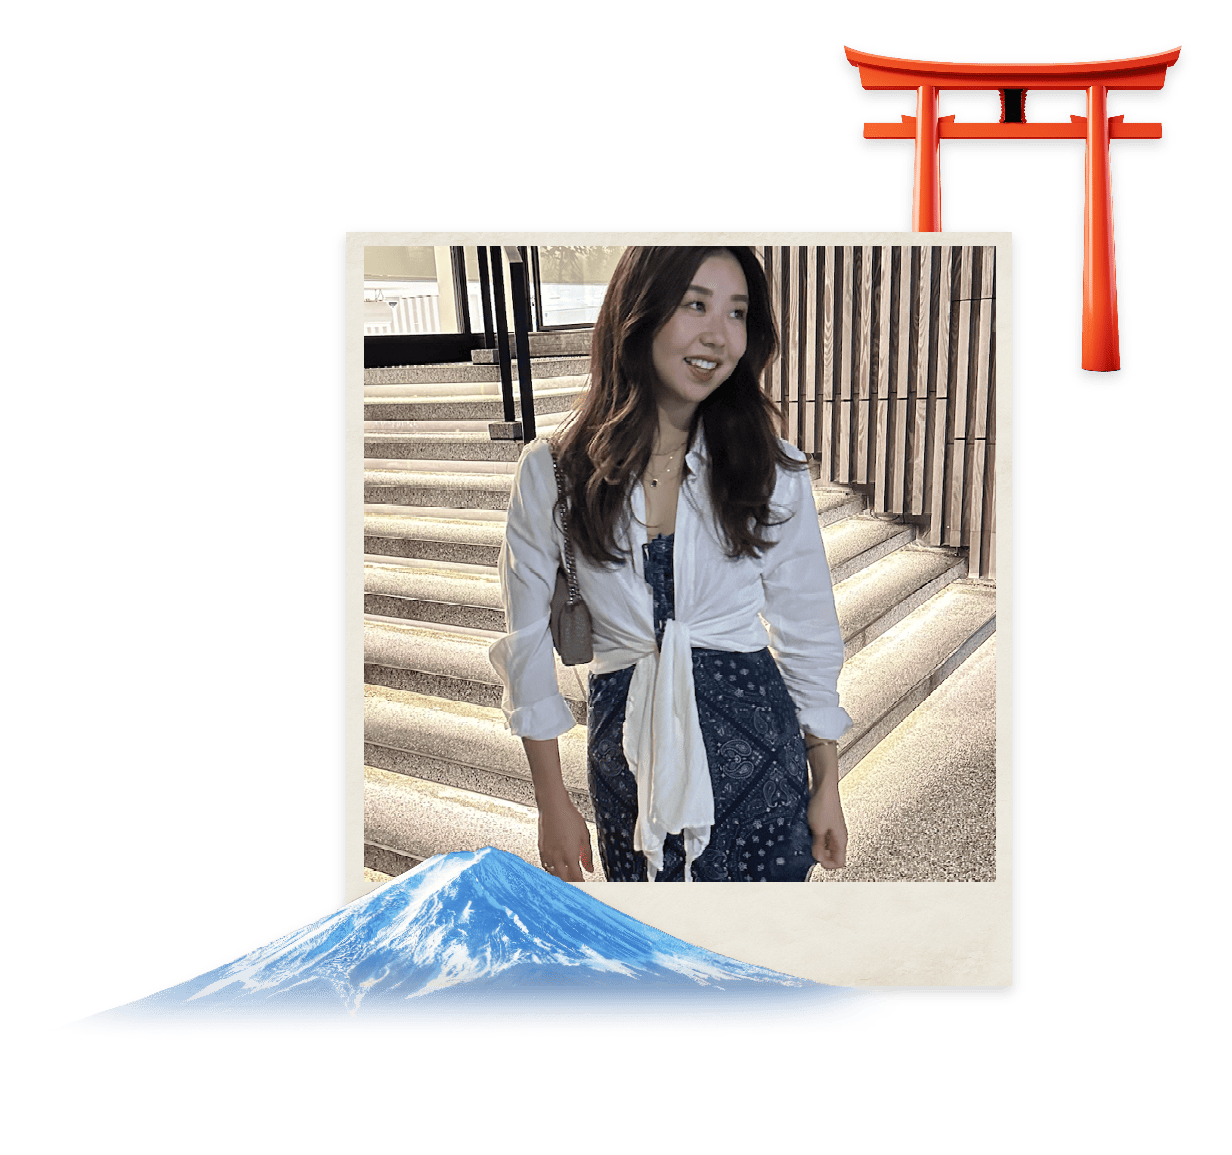 An Asian woman in a blue paisley dress with a white shirt tied in the front smiles and looks to the side, paired with Shinto architecture and mountain in a collage.